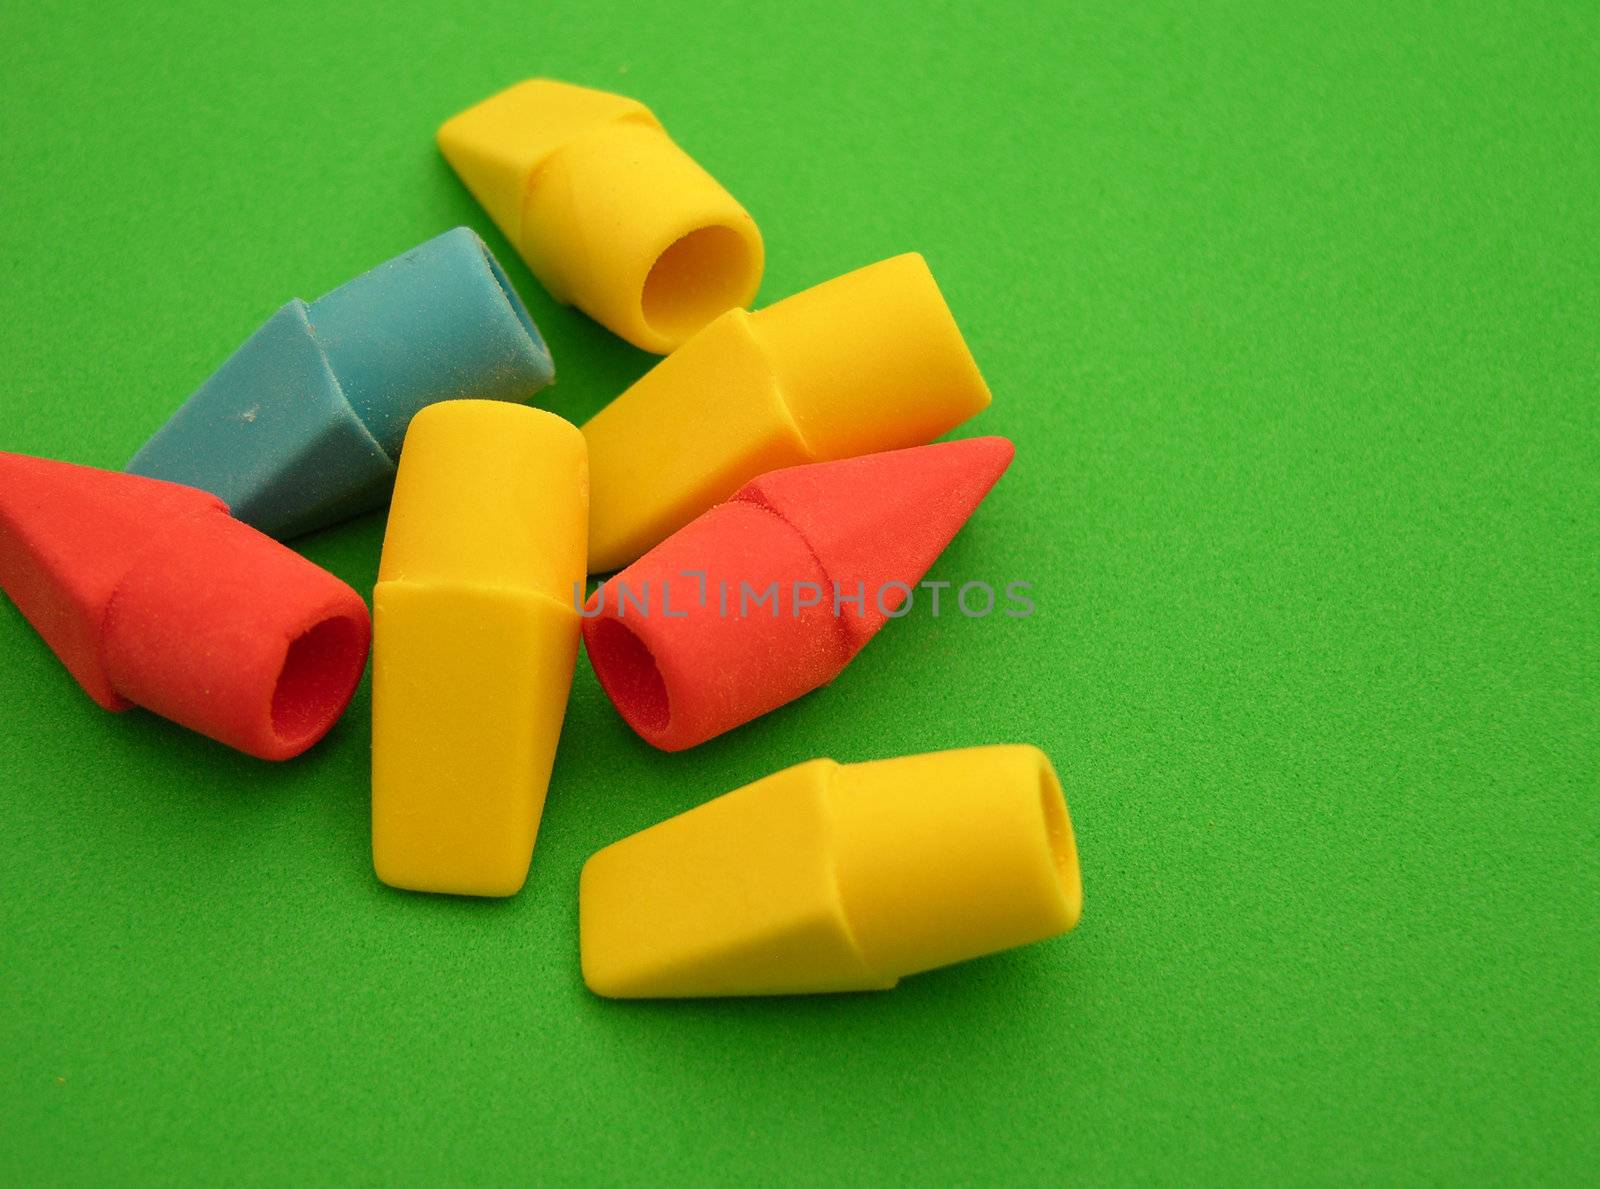 A closeup of eraser heads ready for use